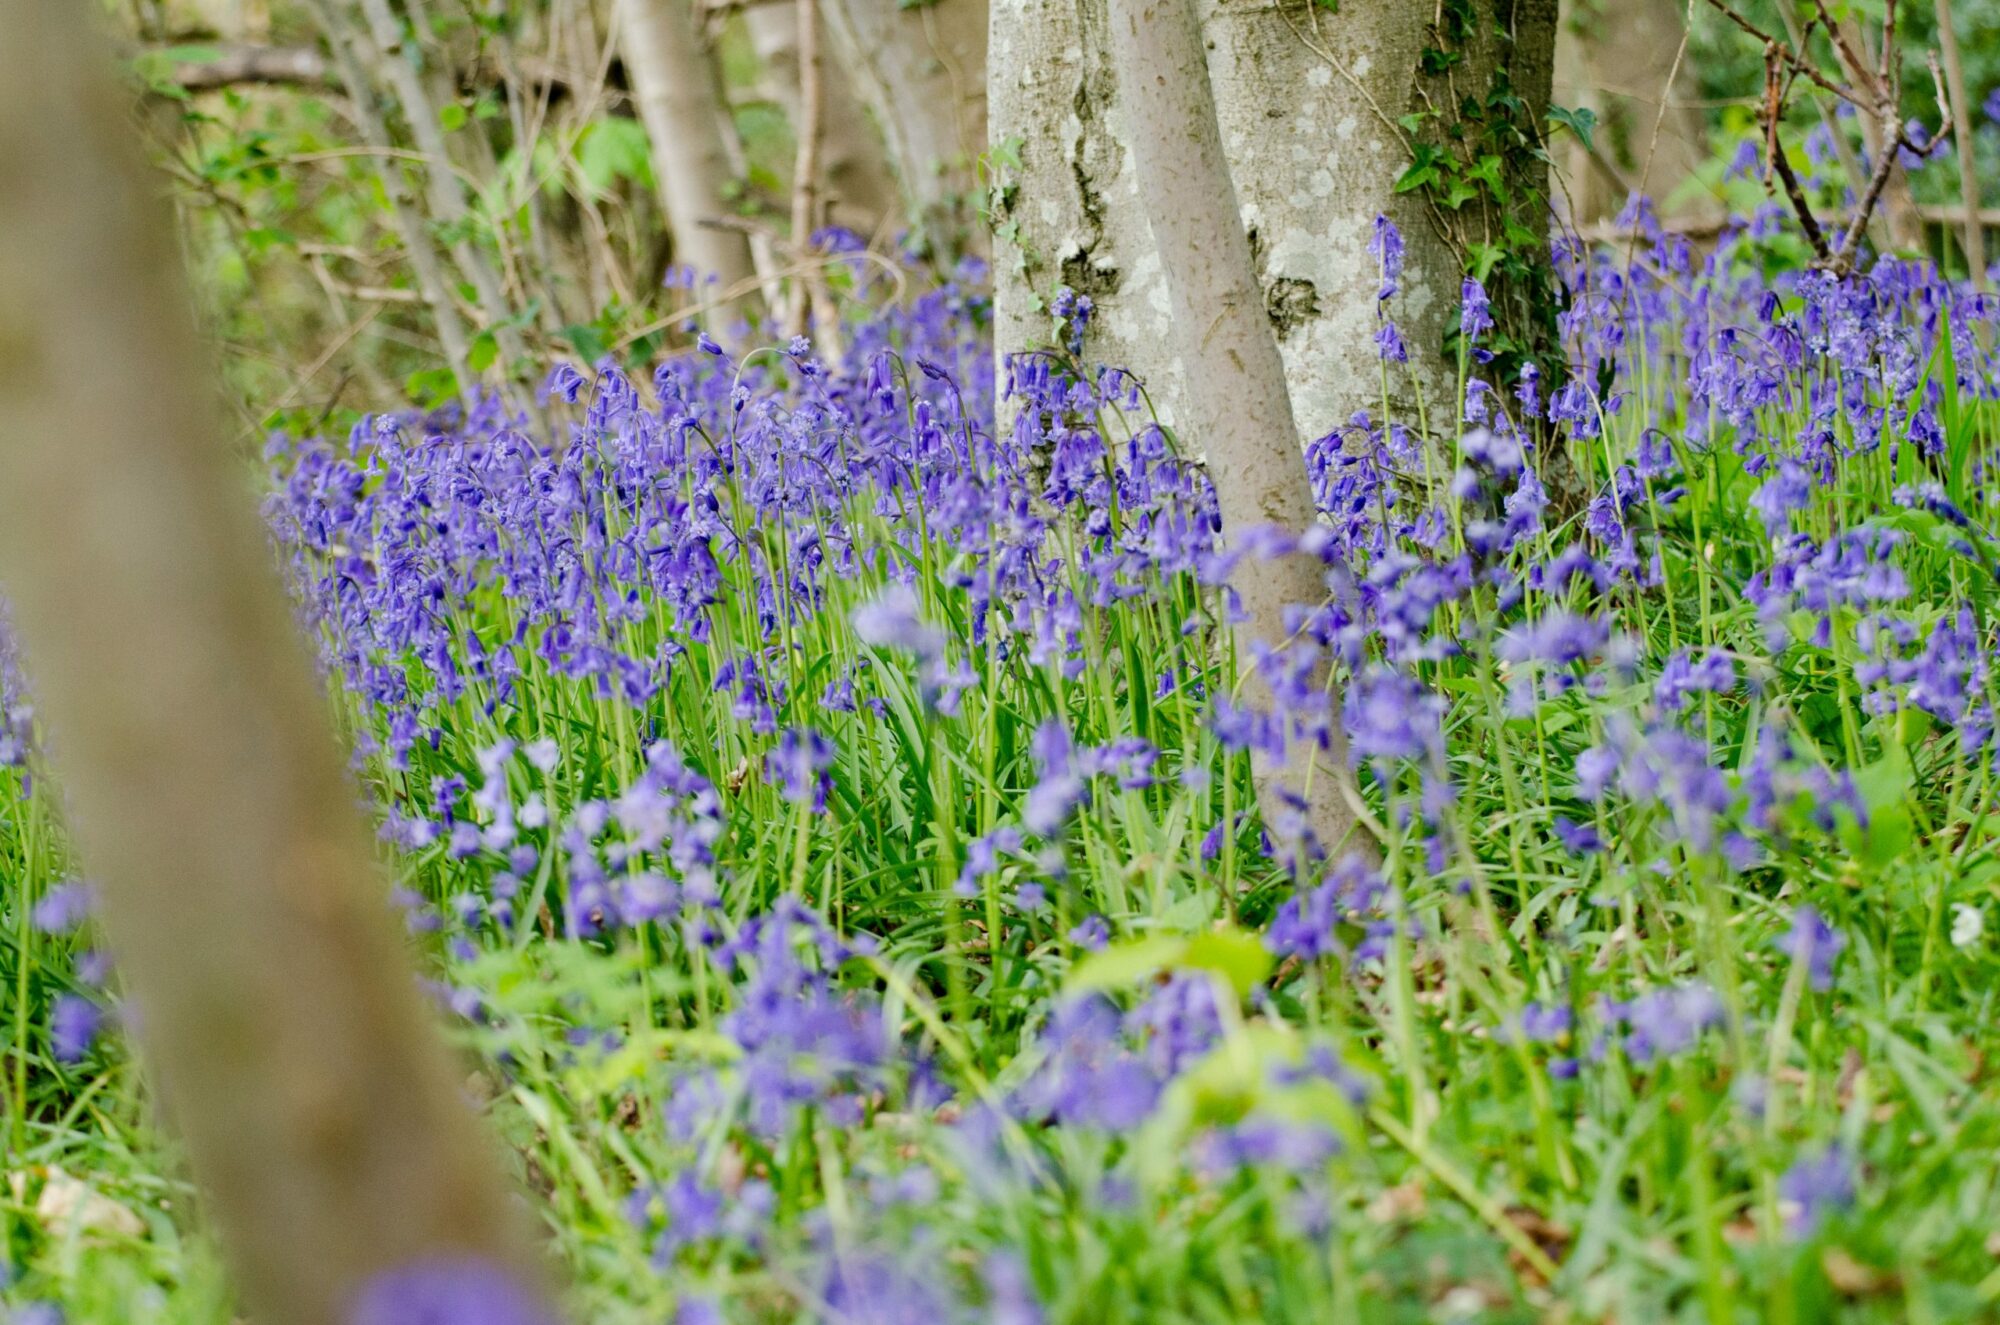 Image name Bluebells Josh Raper Conservation Media 5 scaled 1 the 12 image from the post Walking, Wellbeing and Wildlife in Yorkshire.com.